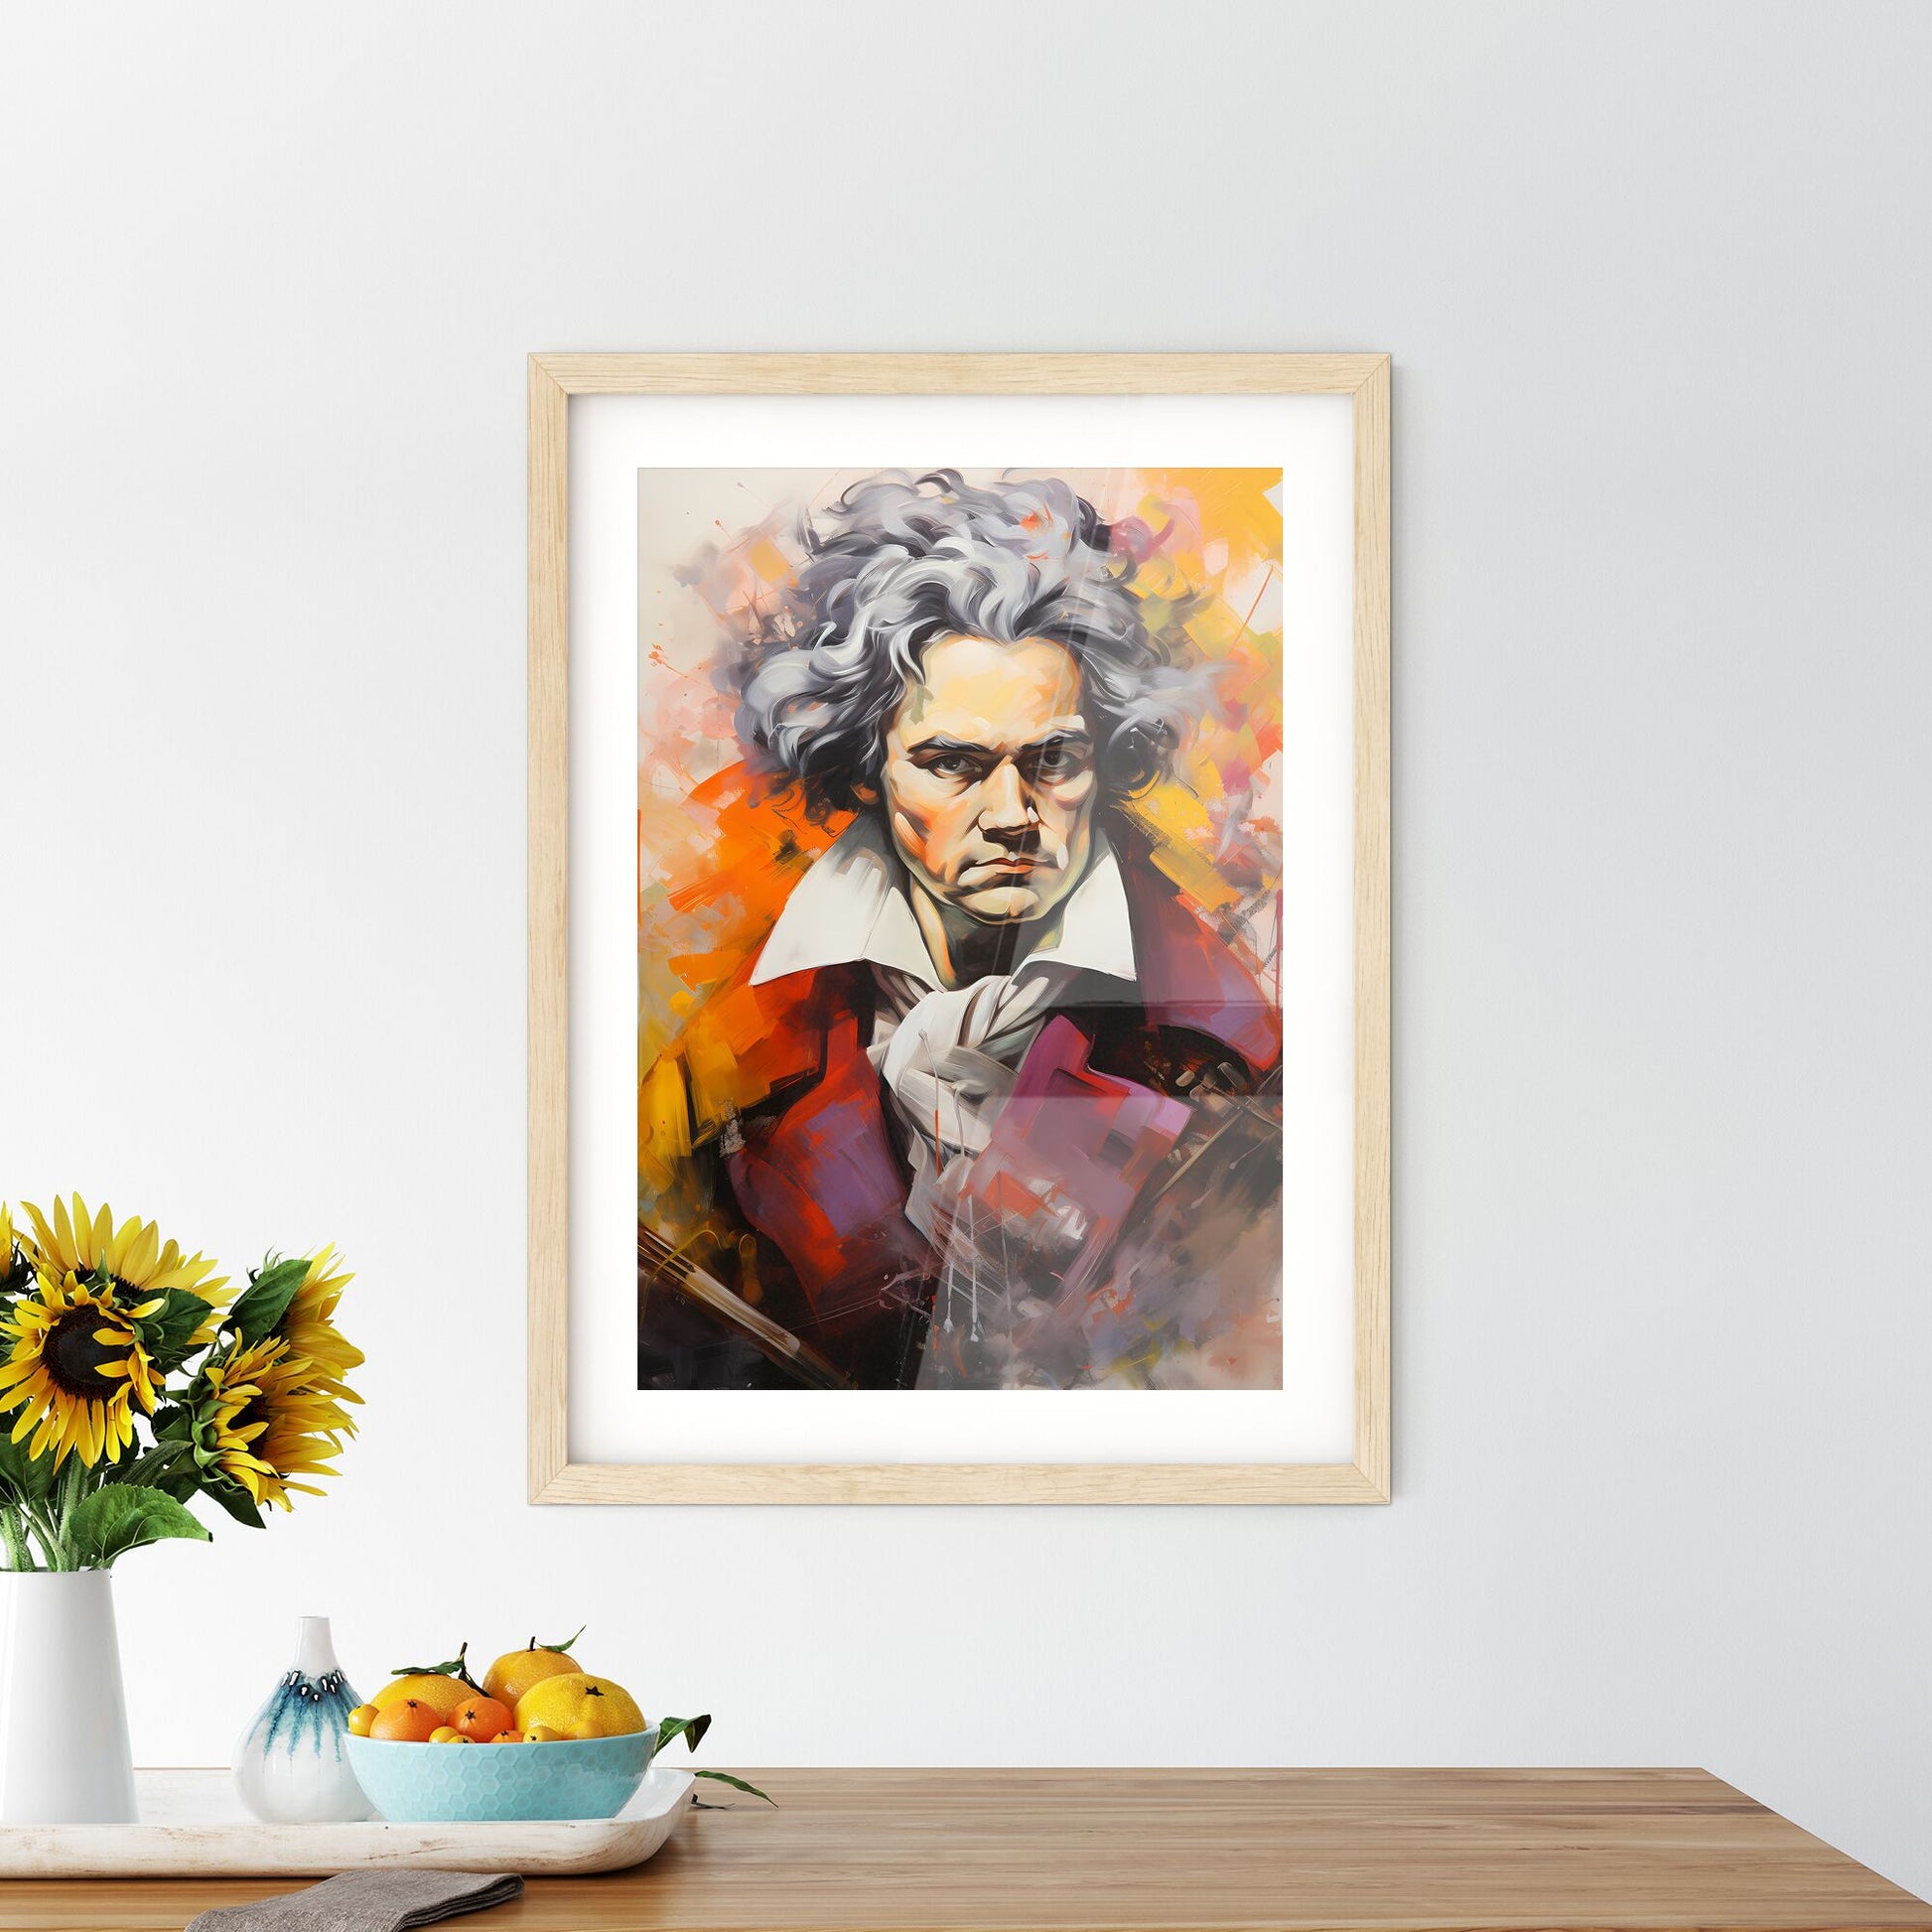 Beethoven - A Painting Of A Man Default Title